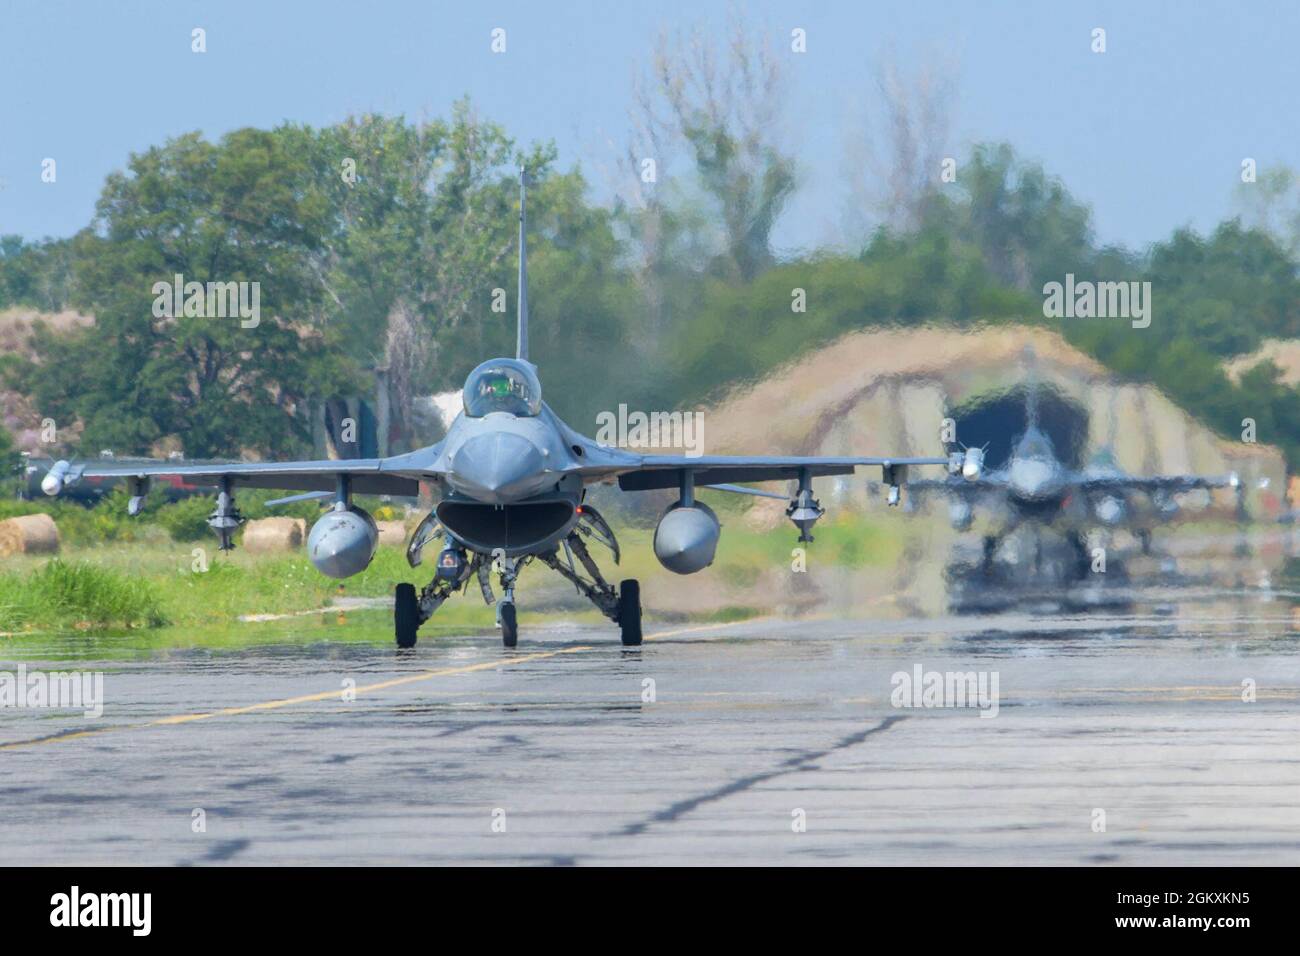 Two U.S. Air Force F-16 Fighting Falcons assigned to the 555th Fighter Squadron taxis on the flightline during Thracian Star 21 at Graf Ignatievo Air Base, Bulgaria, July 20, 2021. Eight F-16s assigned to the 555th FS participated in Thracian Star 21, a Bulgarian air force-led exercise aiming to enhance interoperability and the ability to rapidly deploy to remote locations. Stock Photo